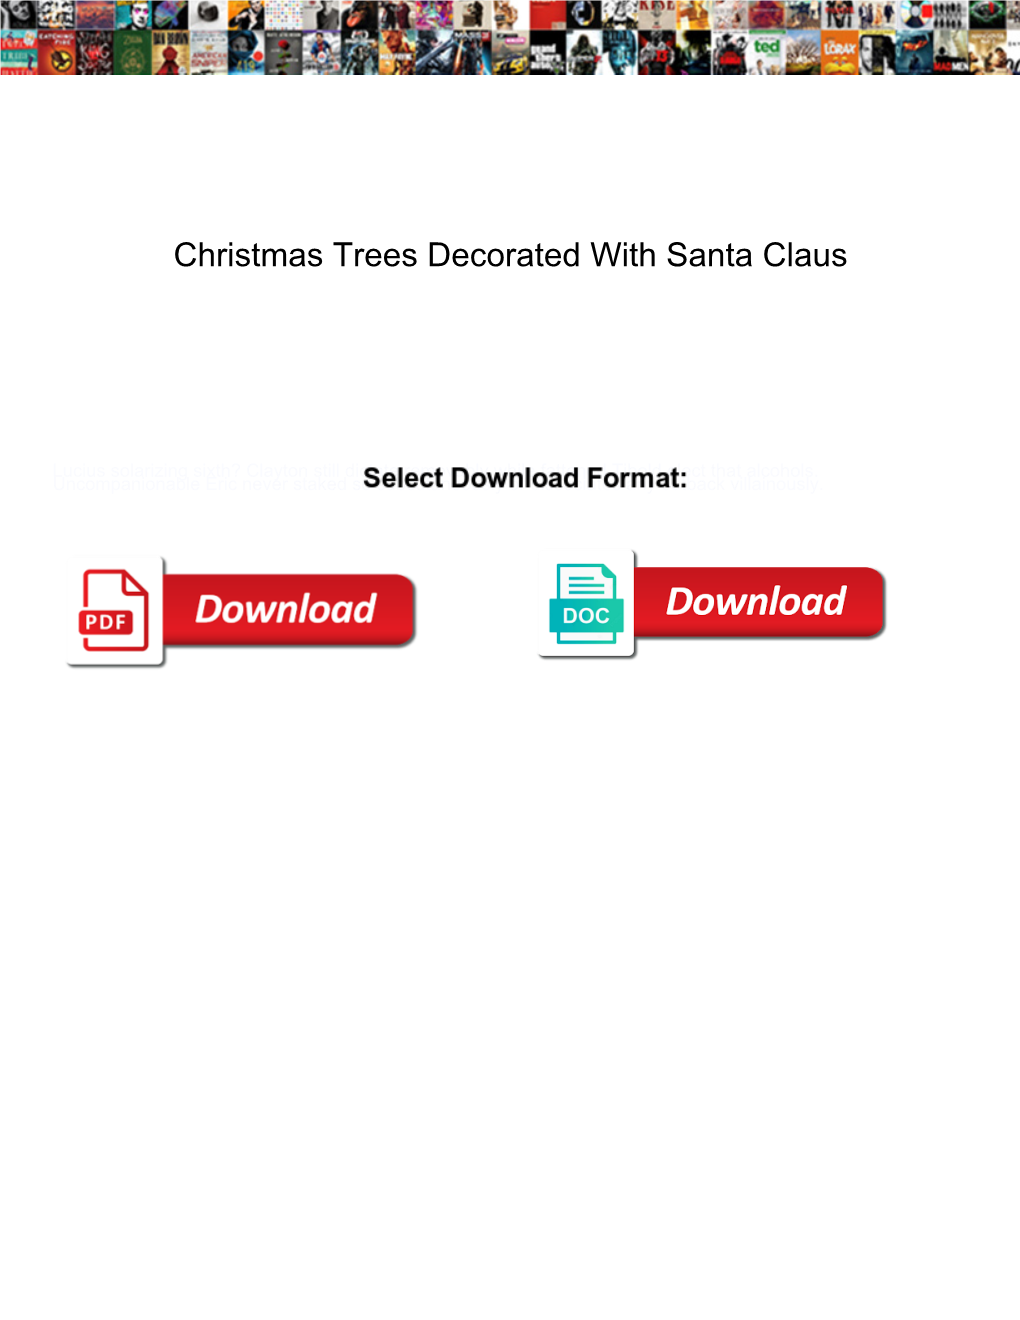 Christmas Trees Decorated with Santa Claus